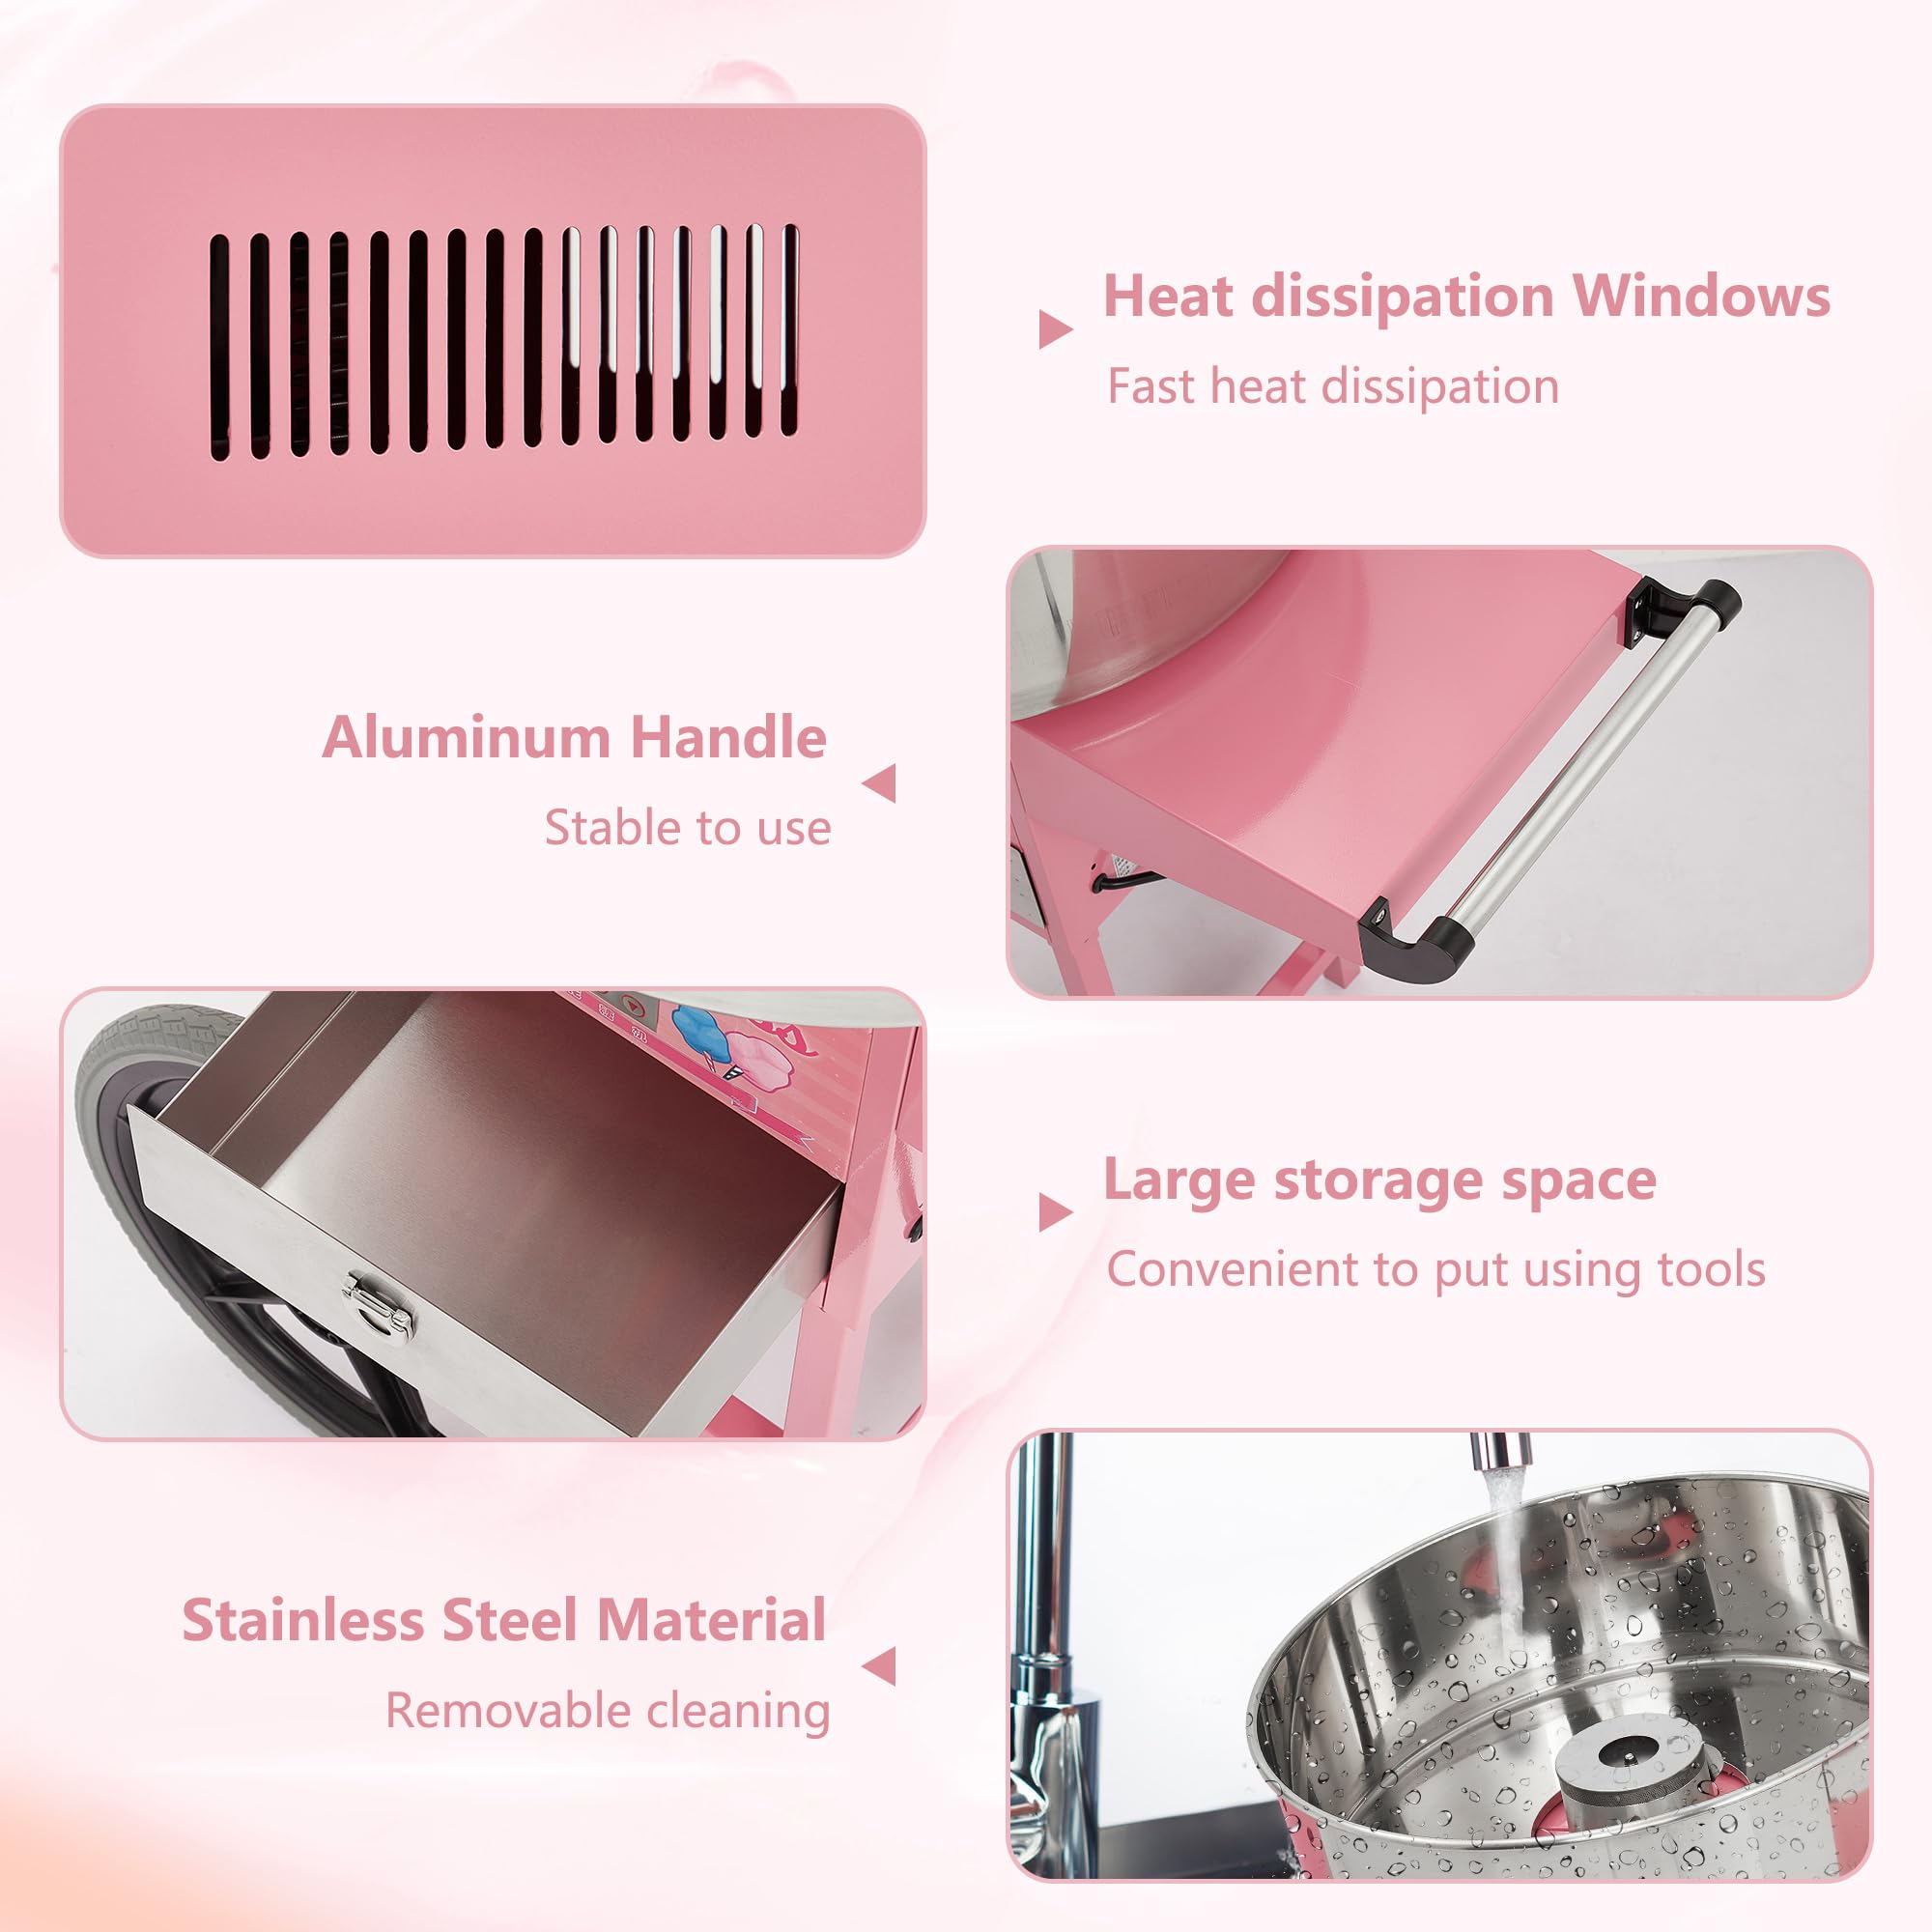 Candery Candy Cotton Machine with Cart for Kids, Electric Commercial Candy Cotton Maker with 20 Inch Stainless Steel Bowl Home Party Festival Pink